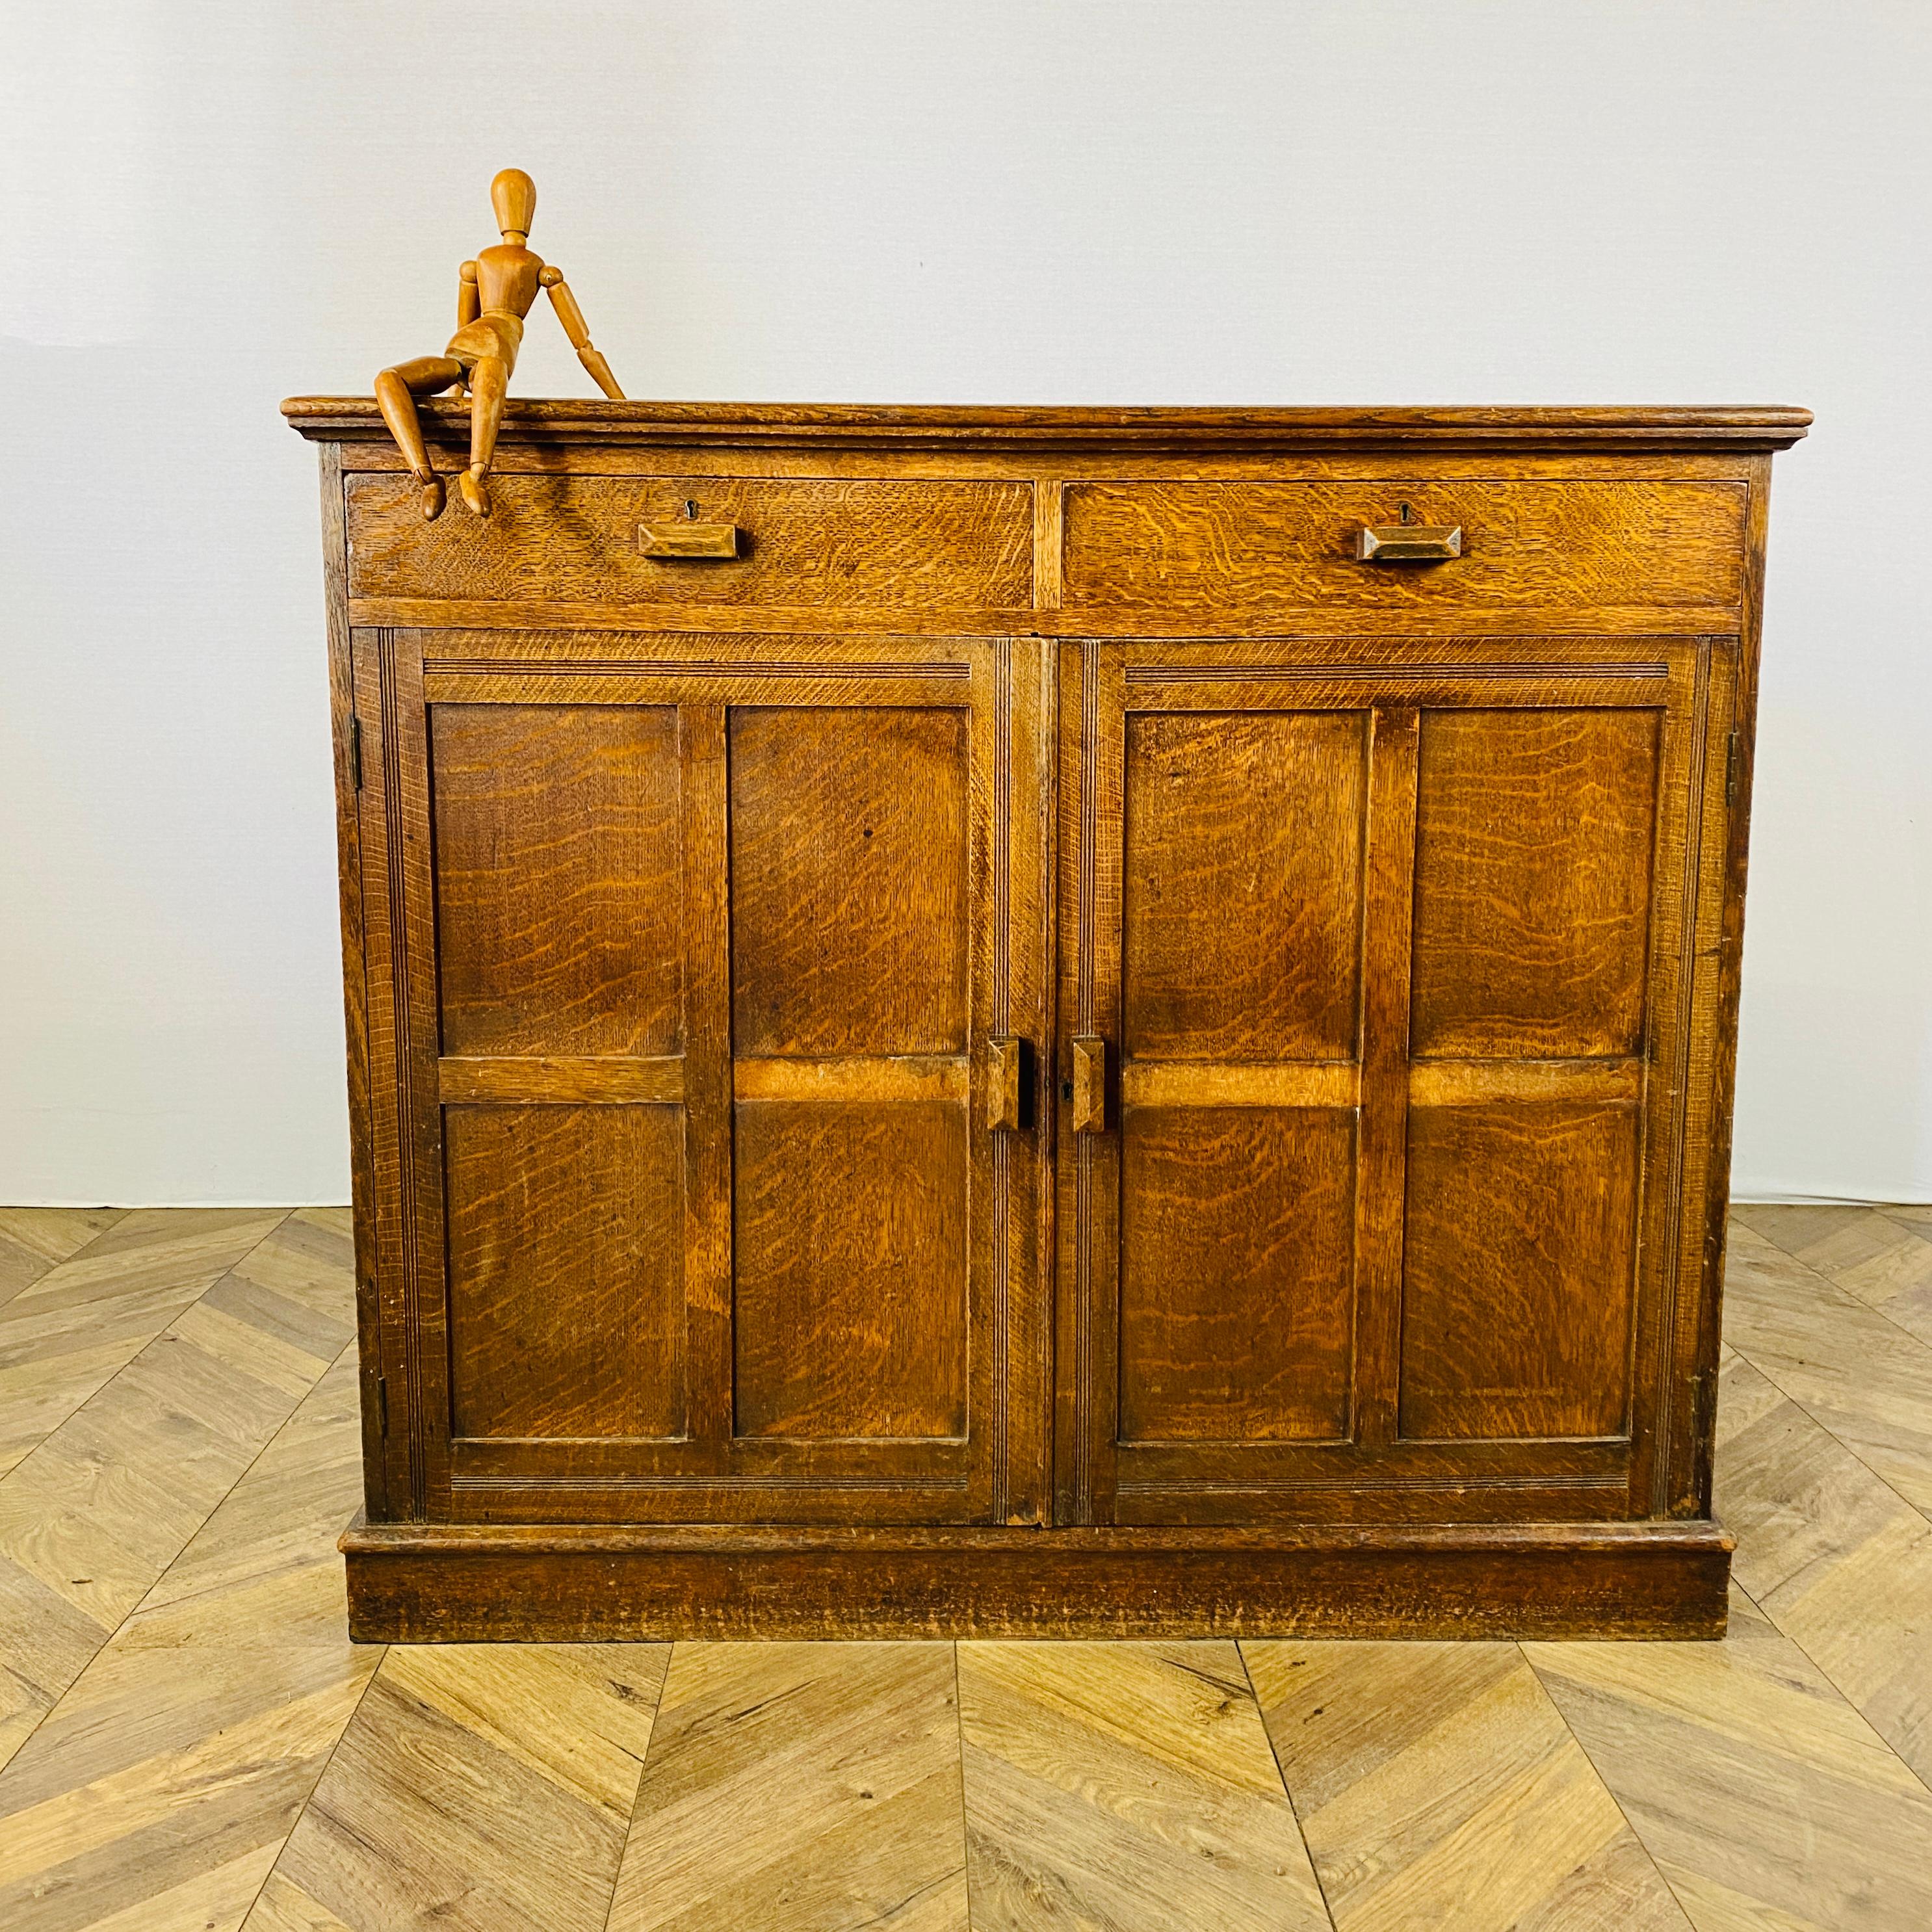 A beautifully large solid oak English sideboard / cabinet, circa 1920s.

The cabinet boasts 2 drawers over a 2-door cupboard with fixed shelves (one shelf is not original) and rich worn patina.

The cabinet is extremely heavy and well built but